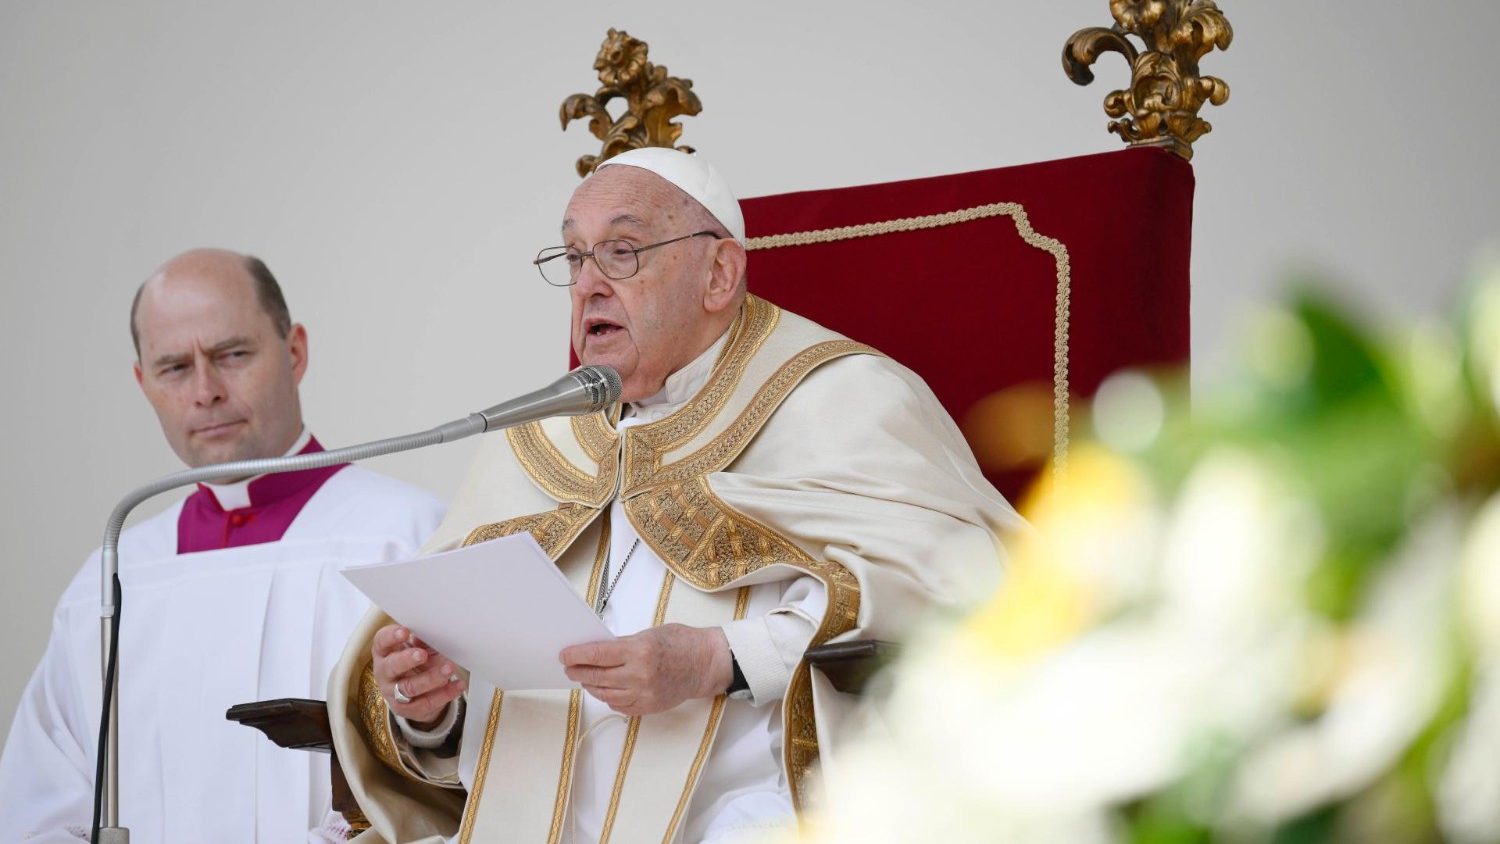 Pope presides at Mass in Venice, calls for inclusion and hospitality